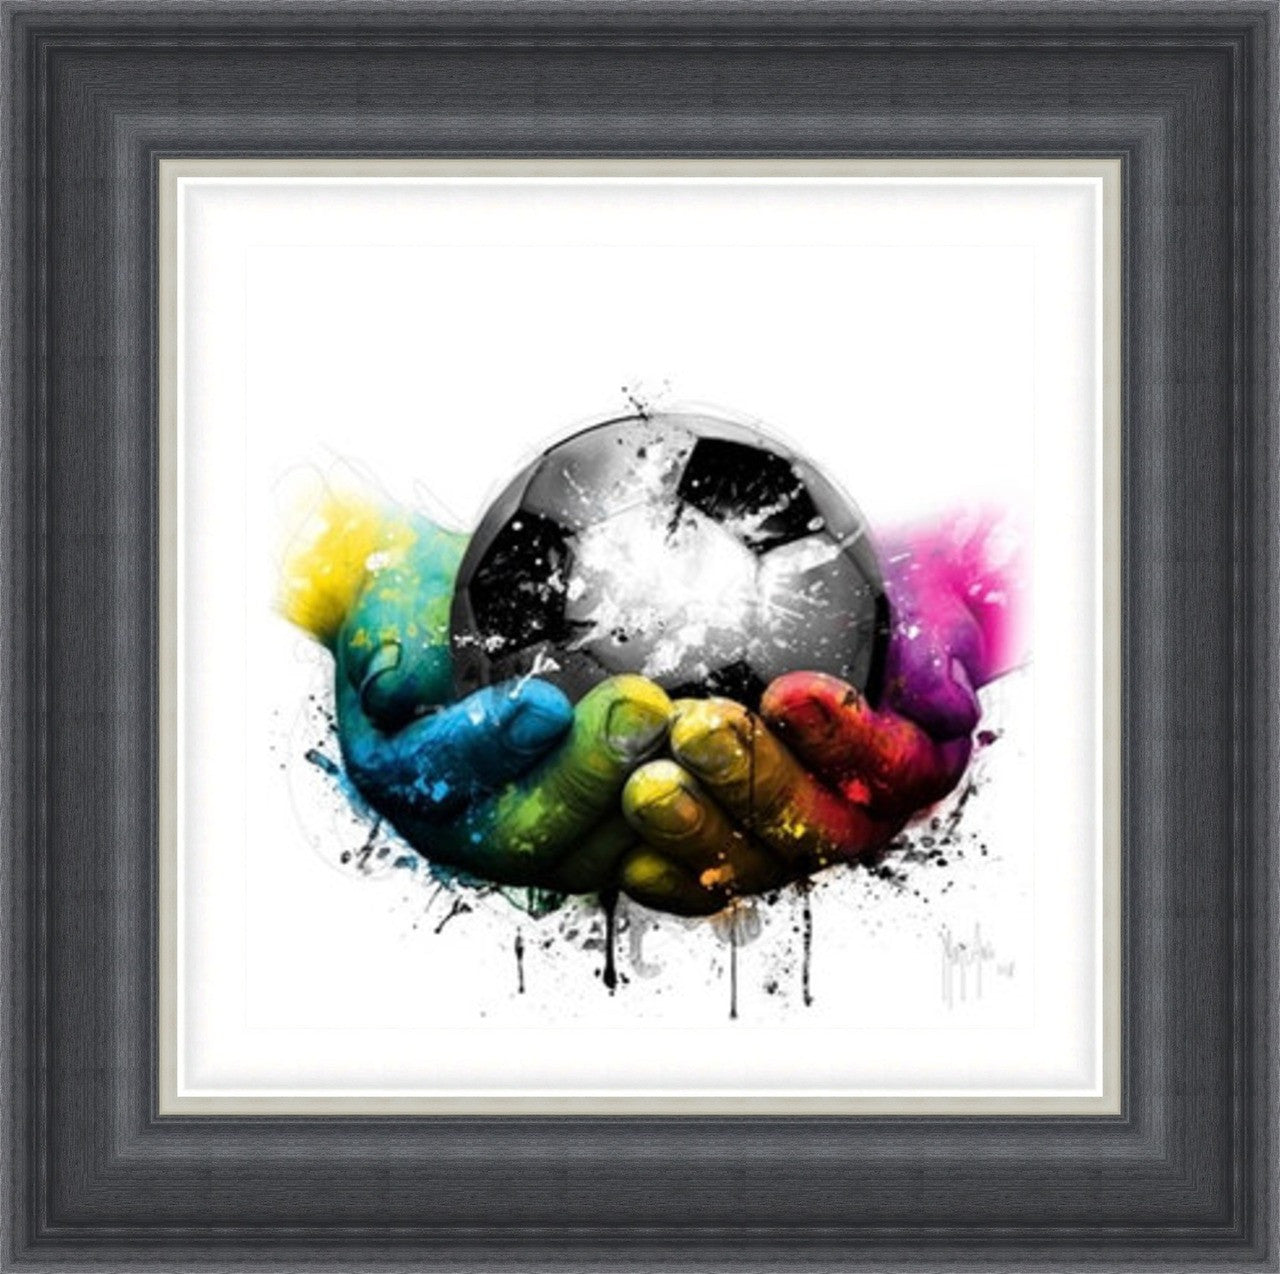 Coupe du Monde (World Cup) by Patrice Murciano